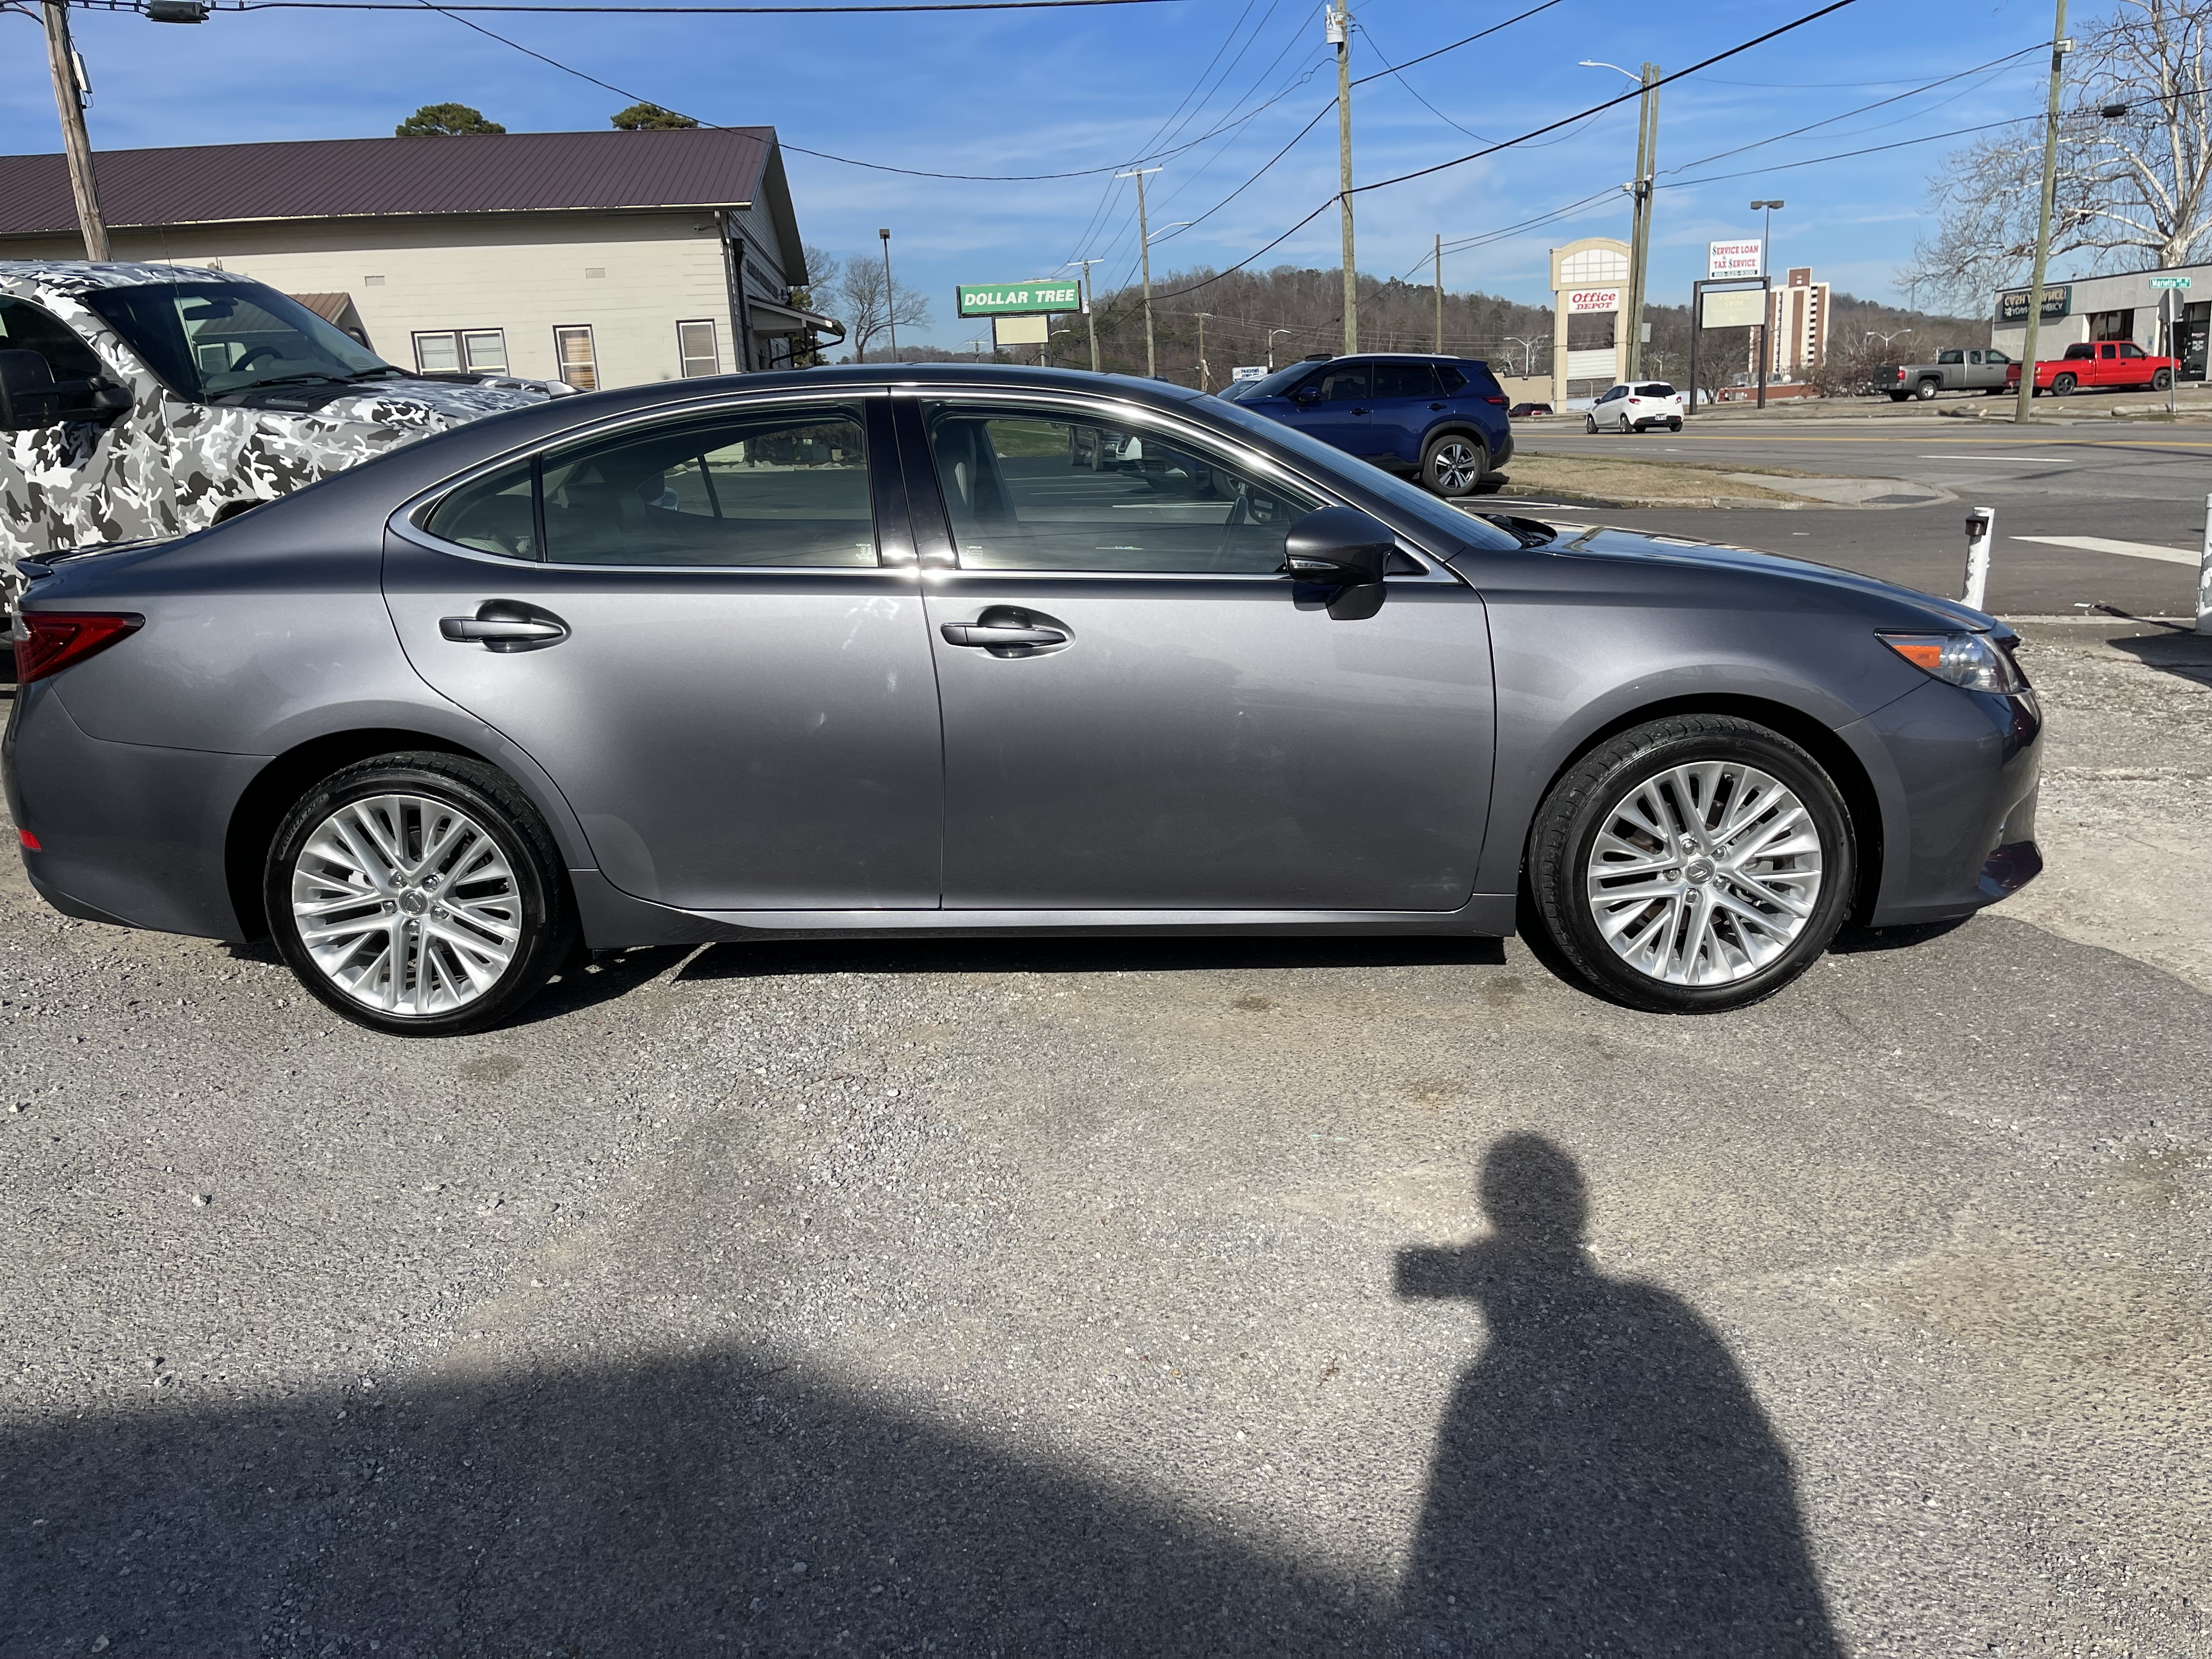 Used Lexus ES 350 for Sale Near Me in Knoxville, TN - Autotrader